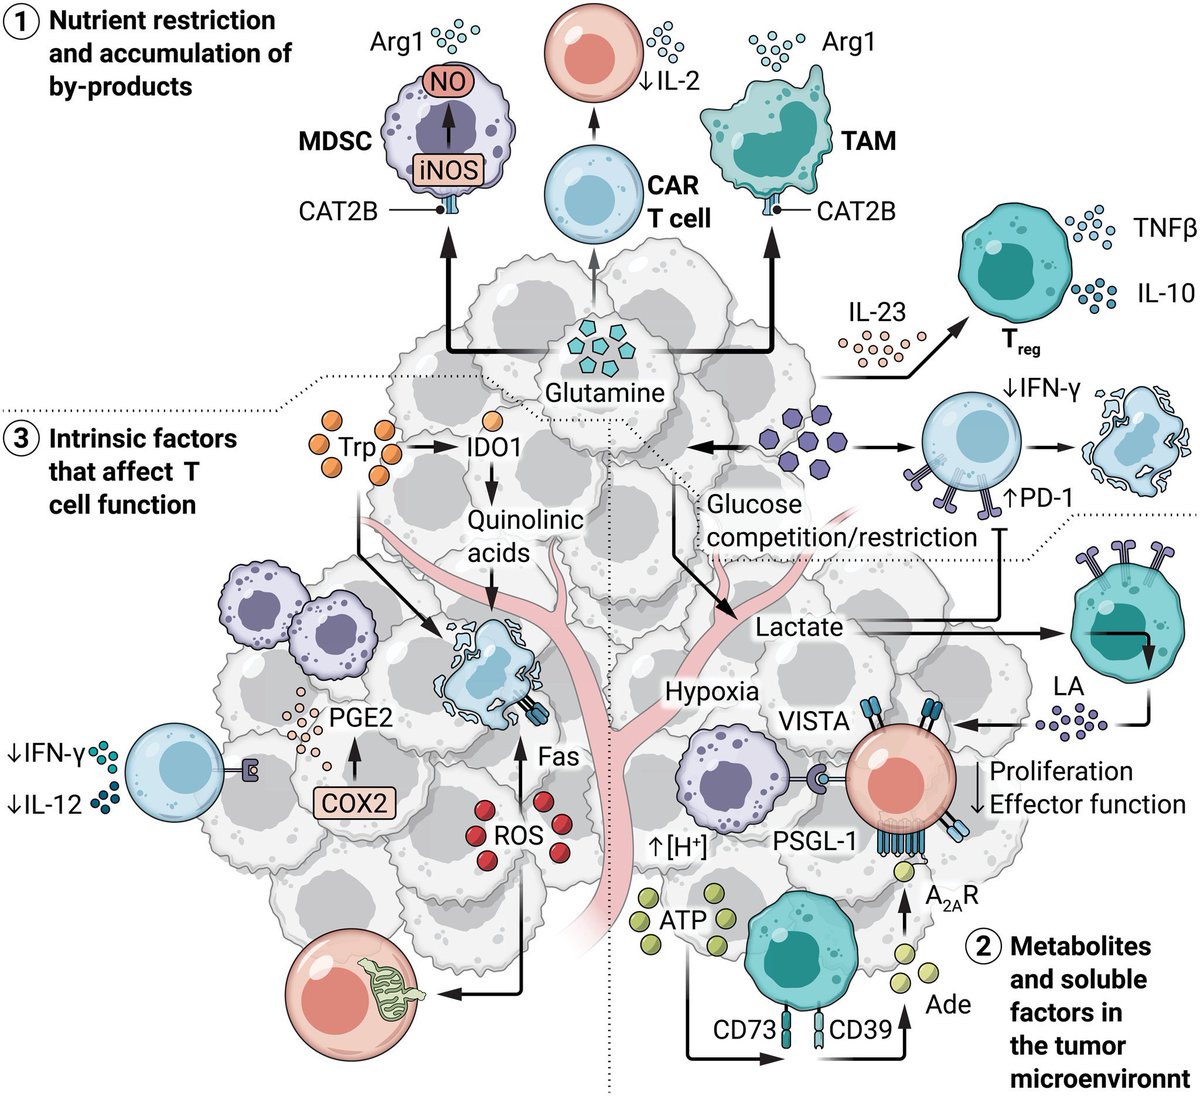 Metabolic challenges and interventions in CAR T cell therapy

scim.ag/32C

@SciImmunology